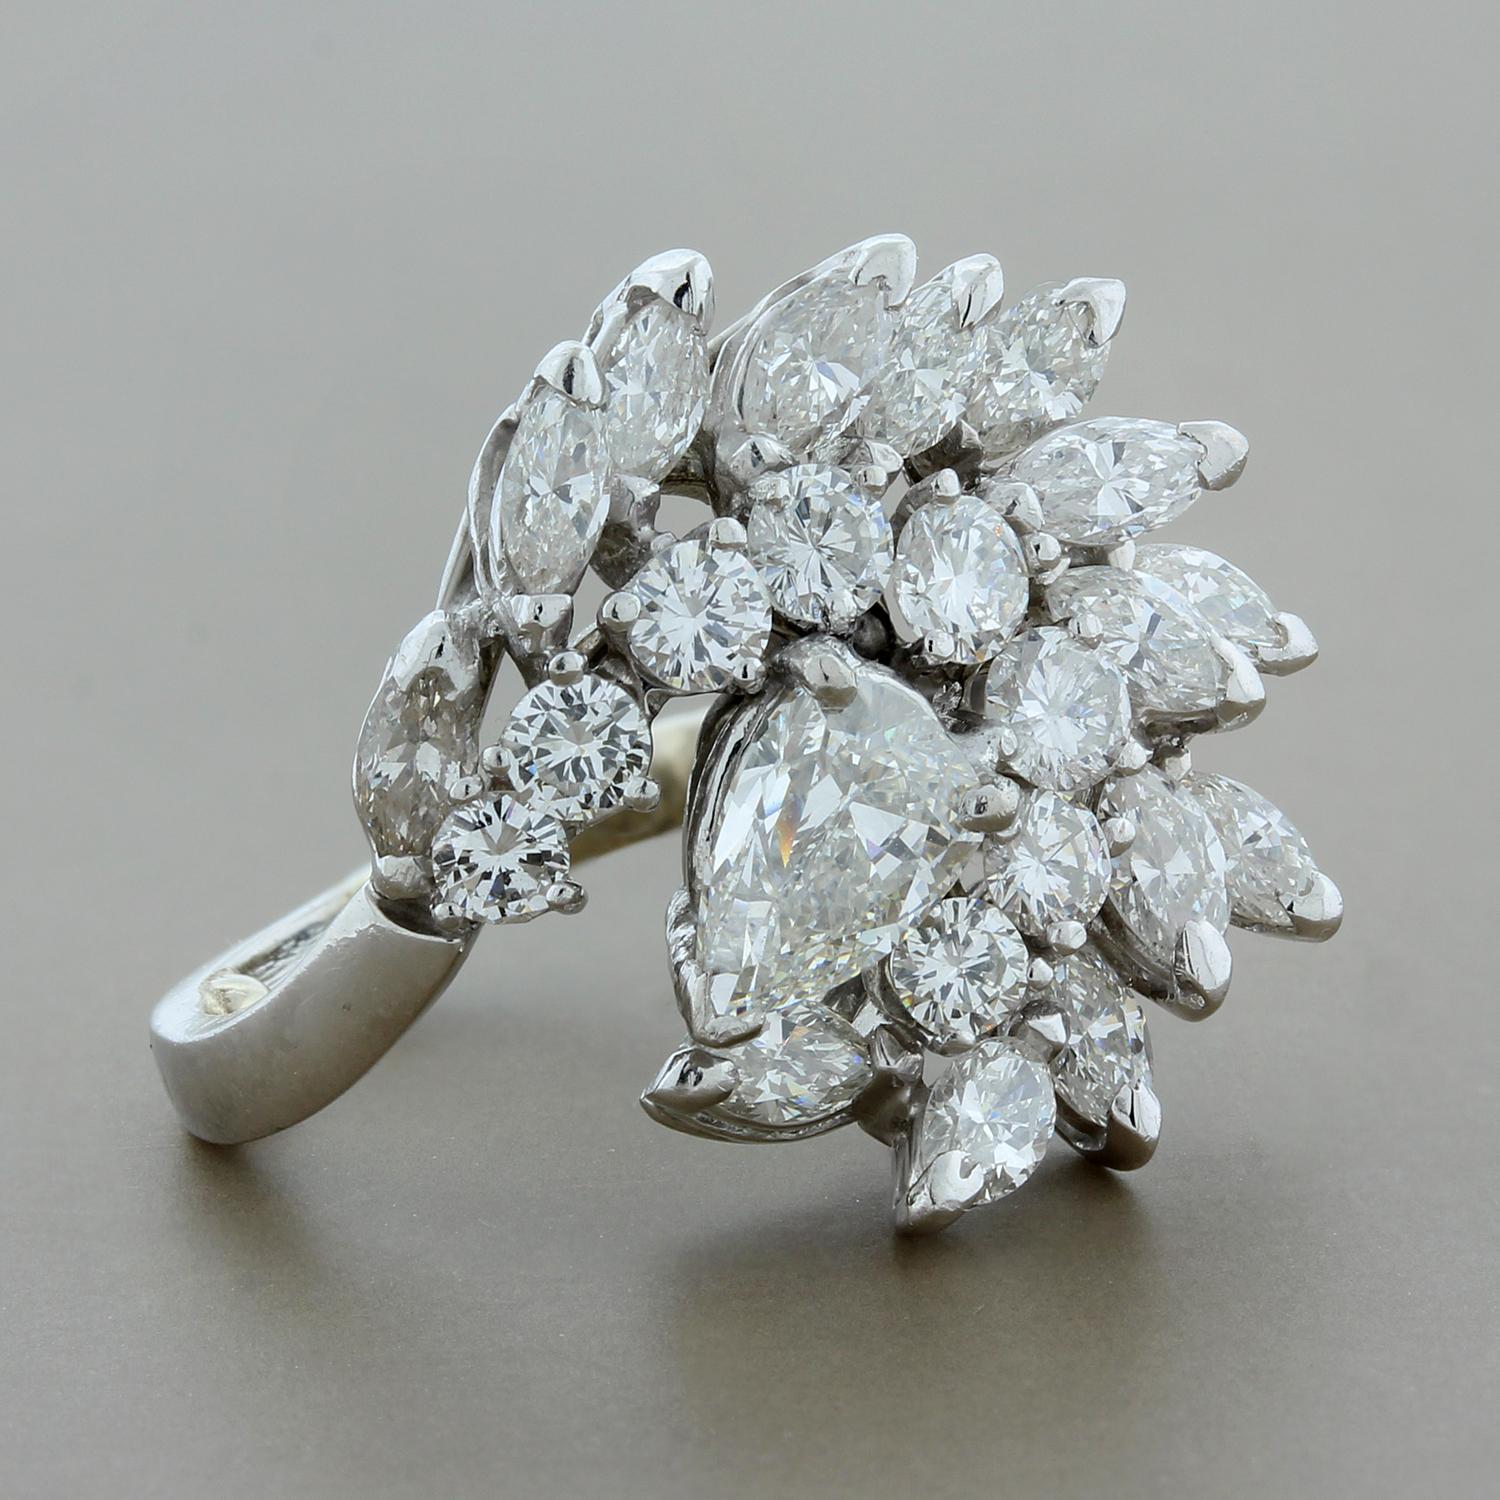 This extravagant estate ring features approximately 3.00 carats of pear, marquise and round cut diamonds set in platinum. The diamonds are organized in a swirling cluster arrangement giving the piece exceptional life and brilliance.  

Ring size 1.25